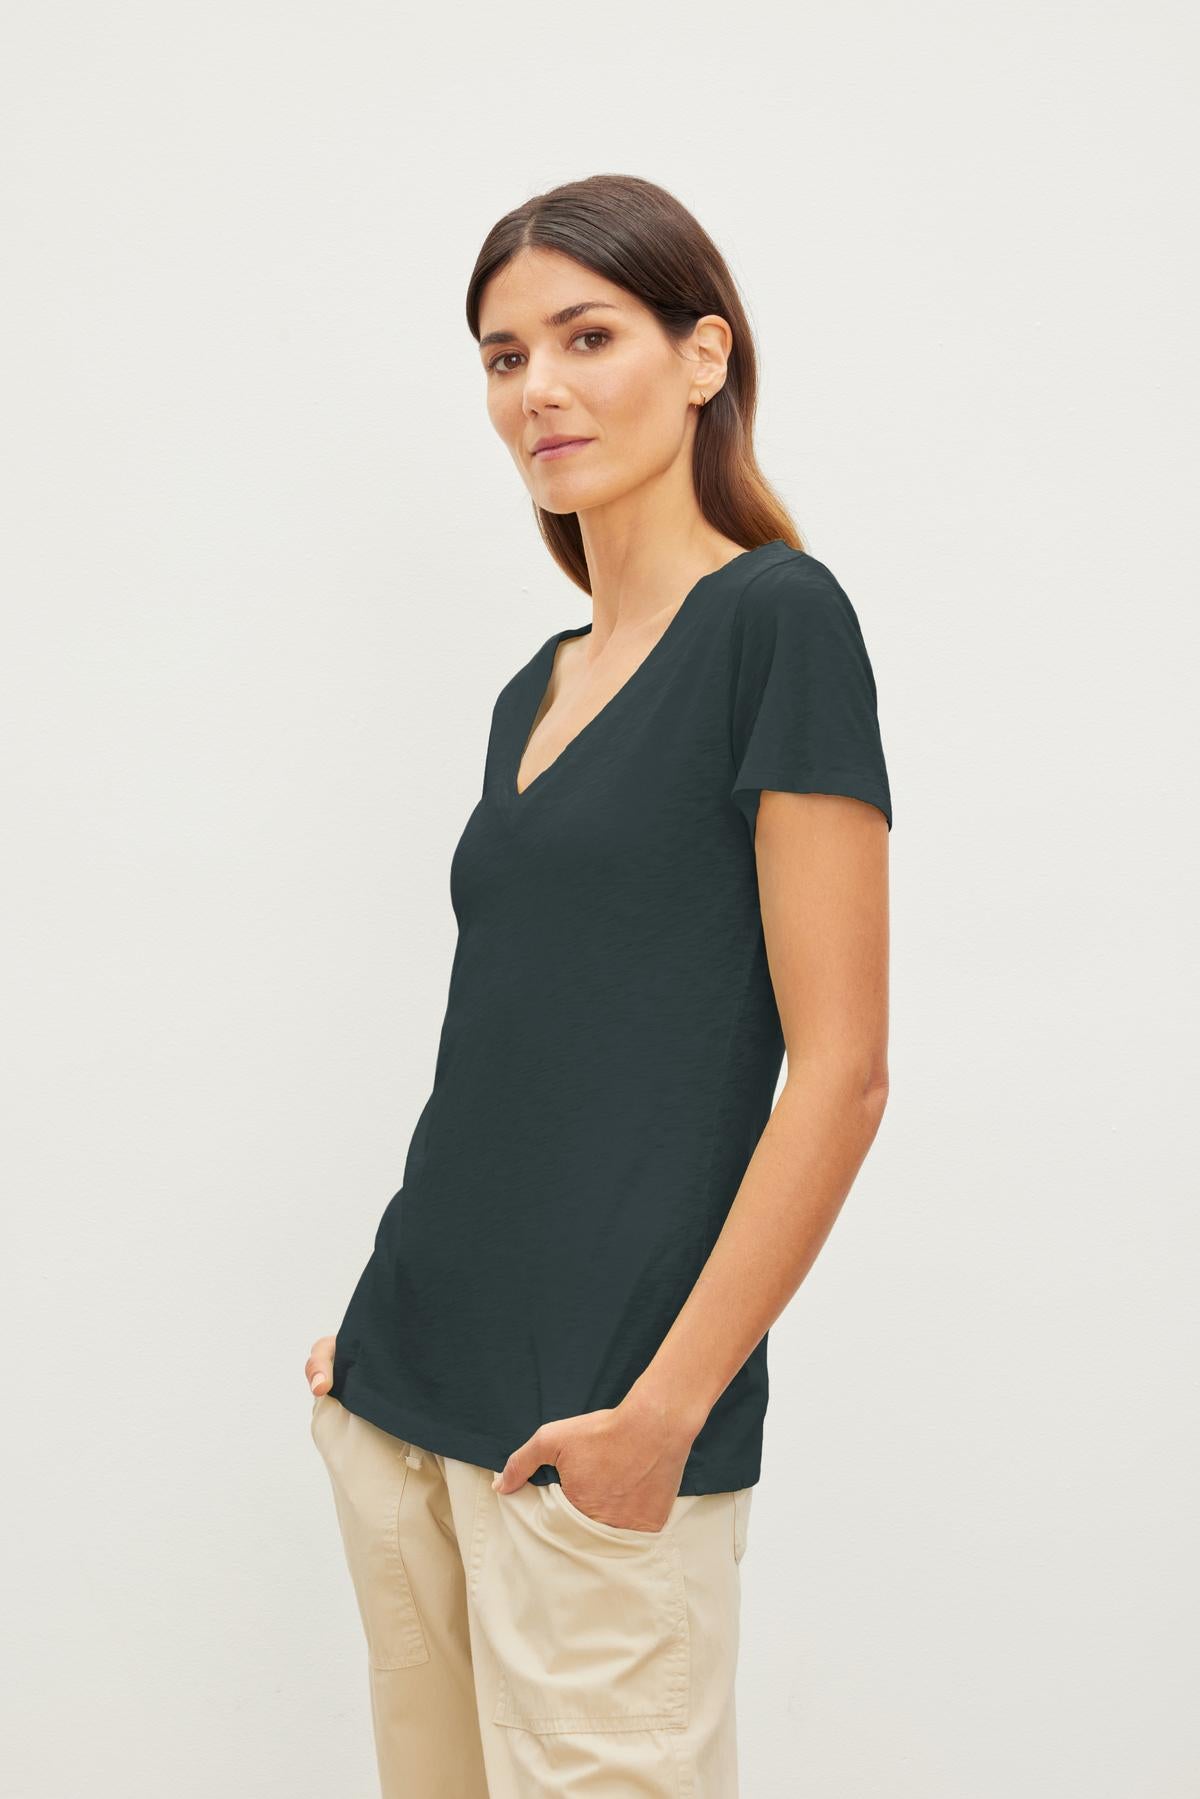   A woman with long brown hair wearing a dark green LILITH TEE by Velvet by Graham & Spencer and light beige pants stands against a plain white background, exuding an air of luxurious softness. 